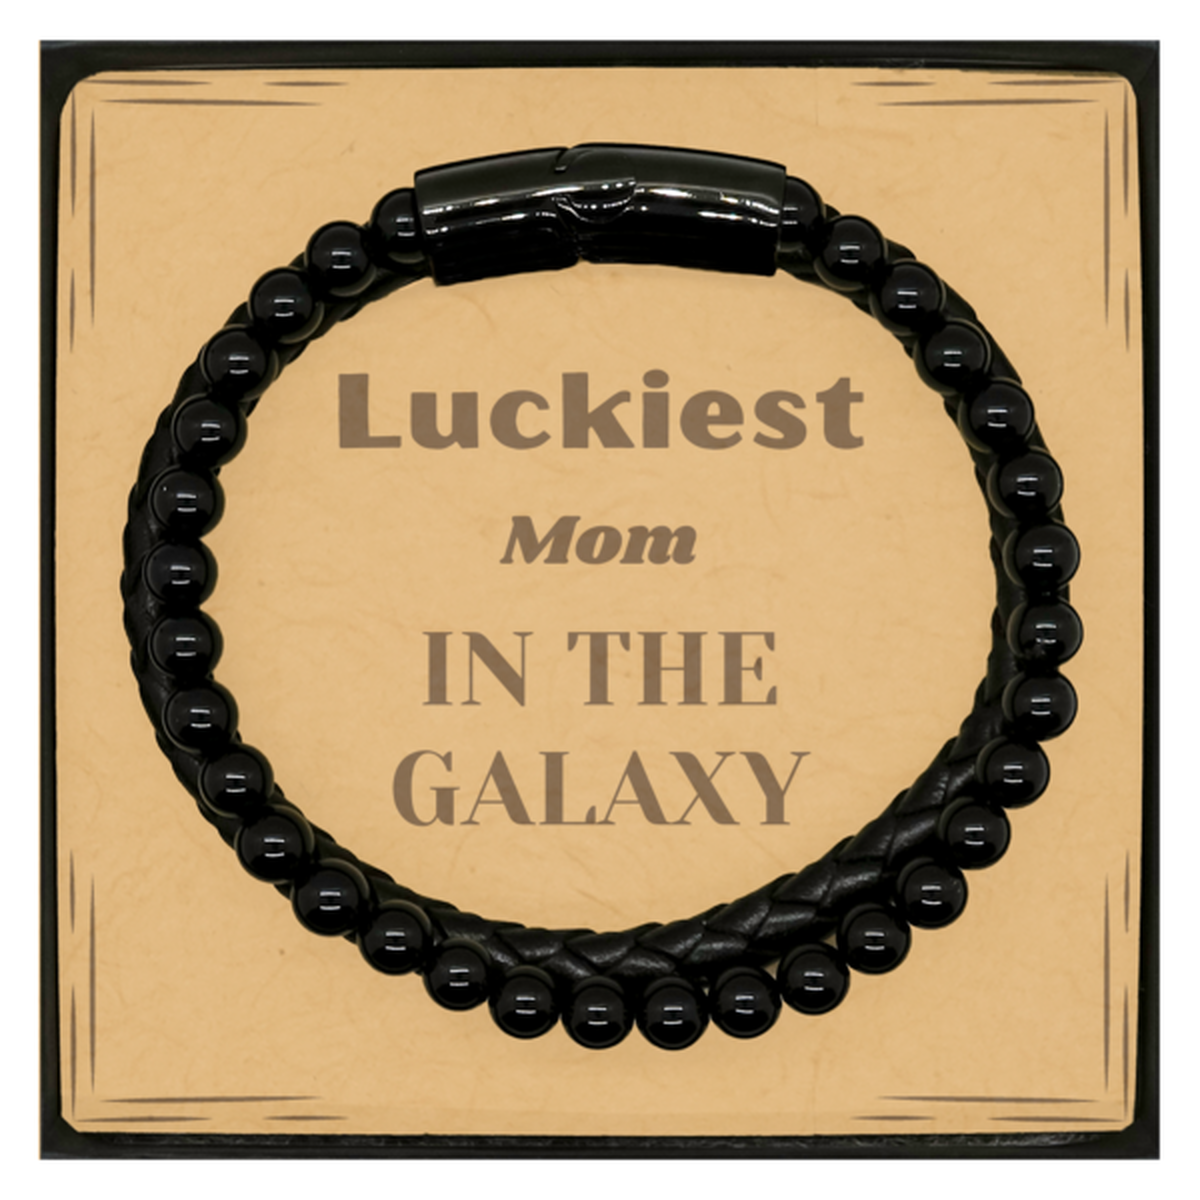 Luckiest Mom in the Galaxy, To My Mom Message Card Gifts, Christmas Mom Stone Leather Bracelets Gifts, X-mas Birthday Unique Gifts For Mom Men Women